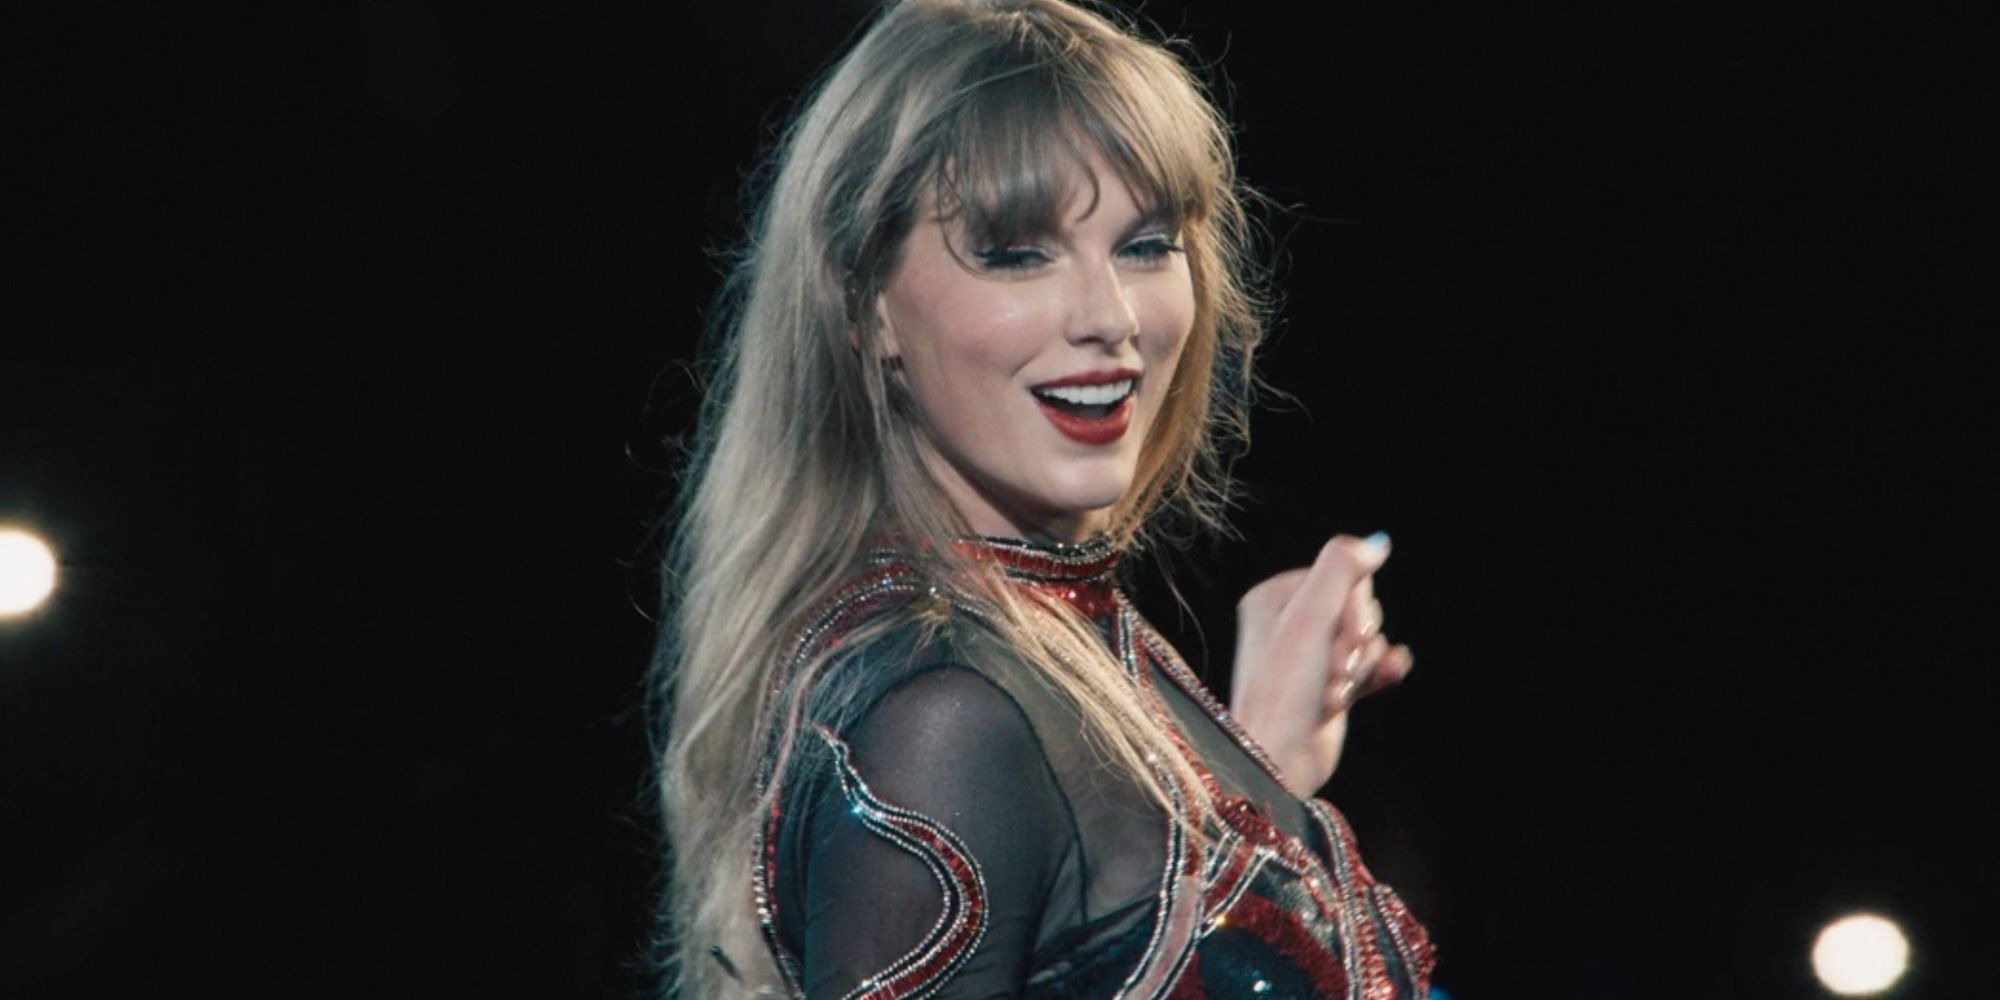 Taylor Swift smiling during Delicate in The Eras Tour